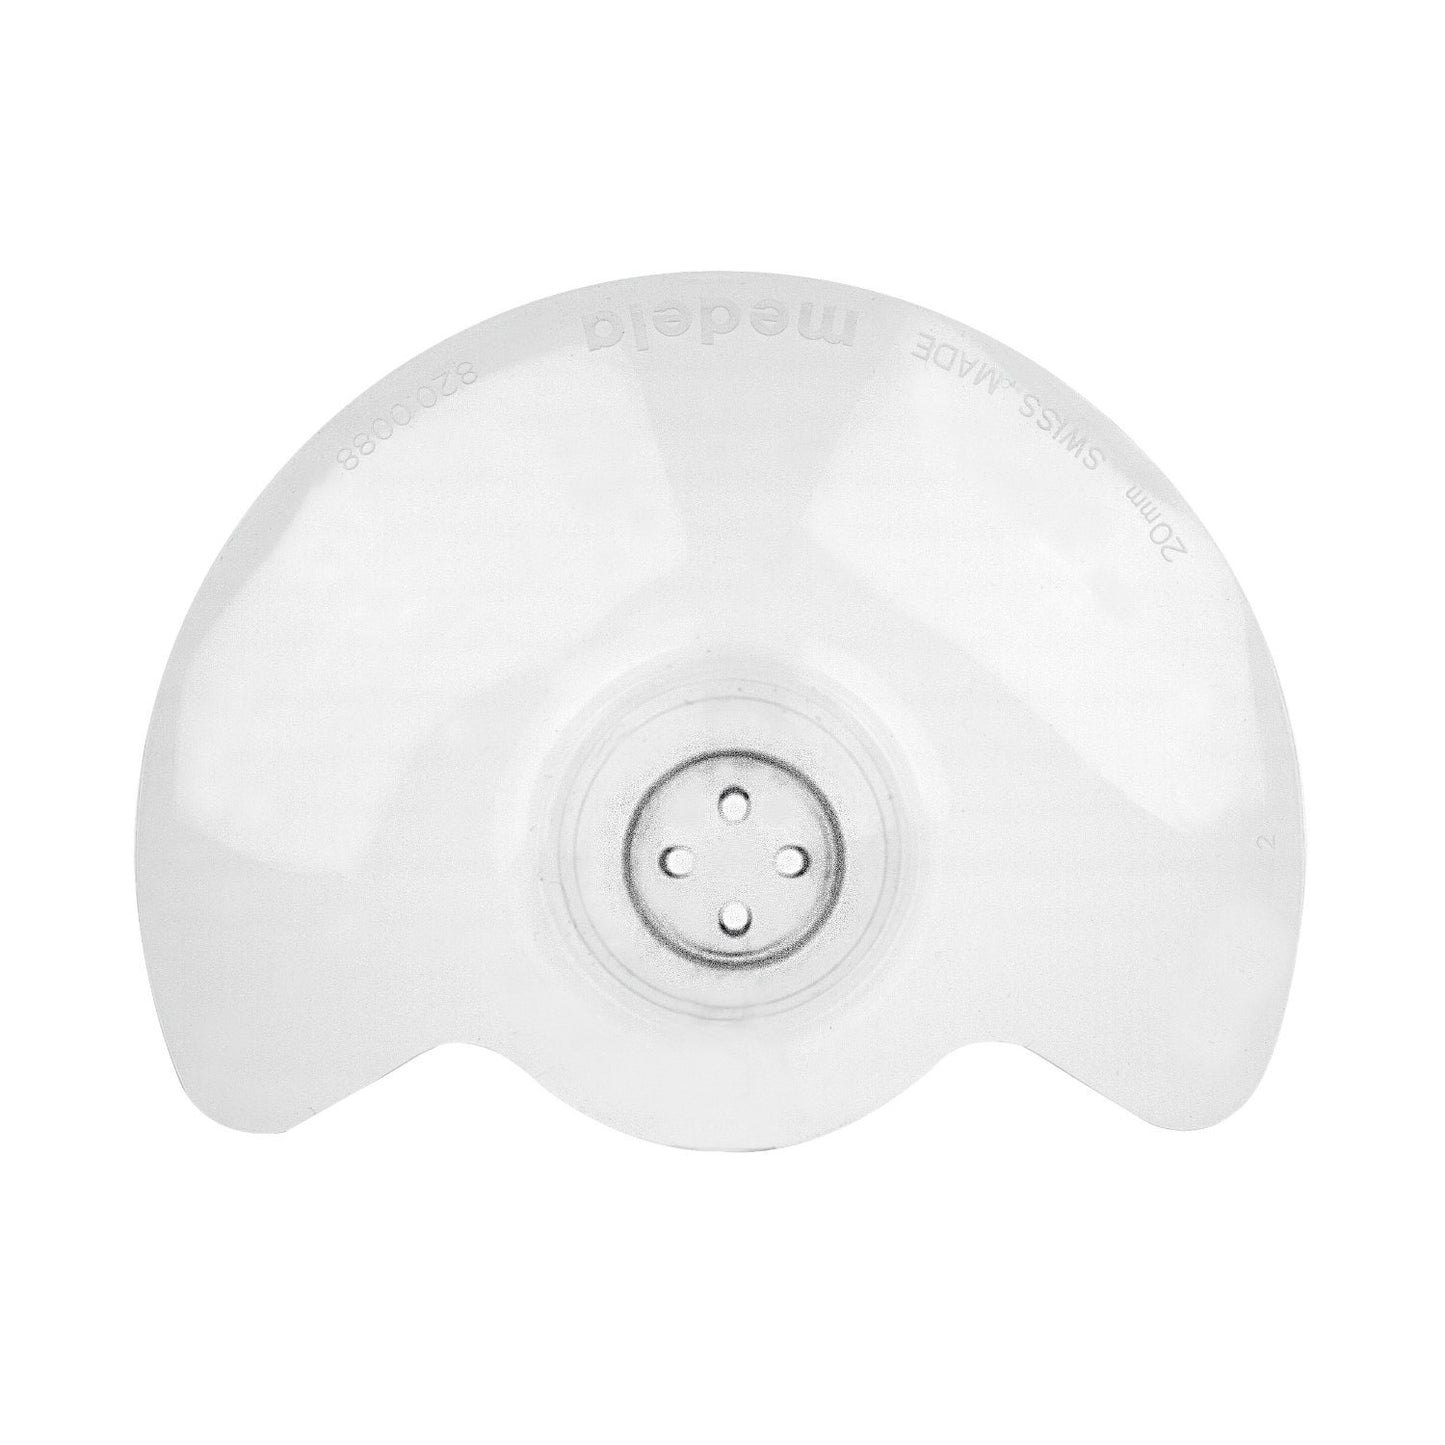 Medela Contact Nipple Shield, Small 20mm (2 Pack)